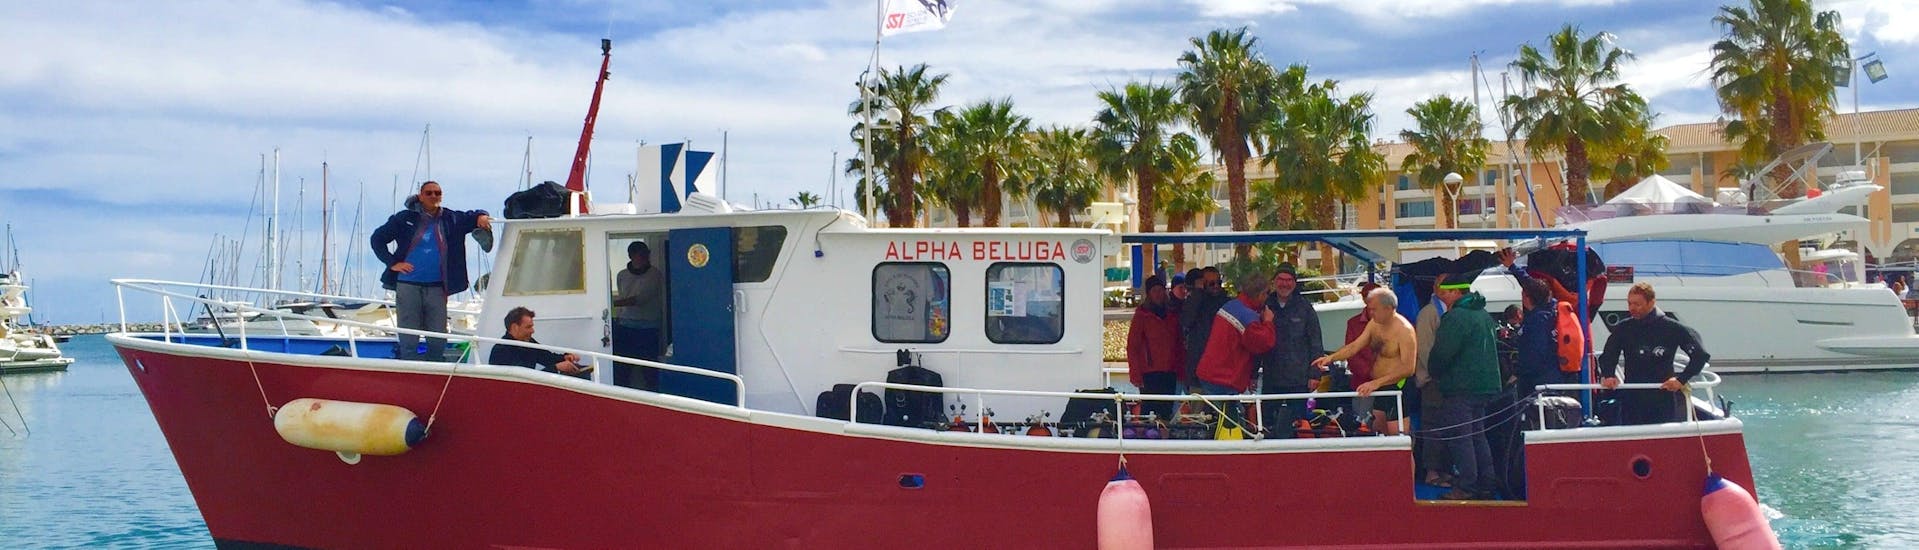 The boat of Alpha Beluga Plongée in the Fréjus harbour ready to head to one of the dive sites around the Esterel Massif where are taking place trial dives and diving courses.